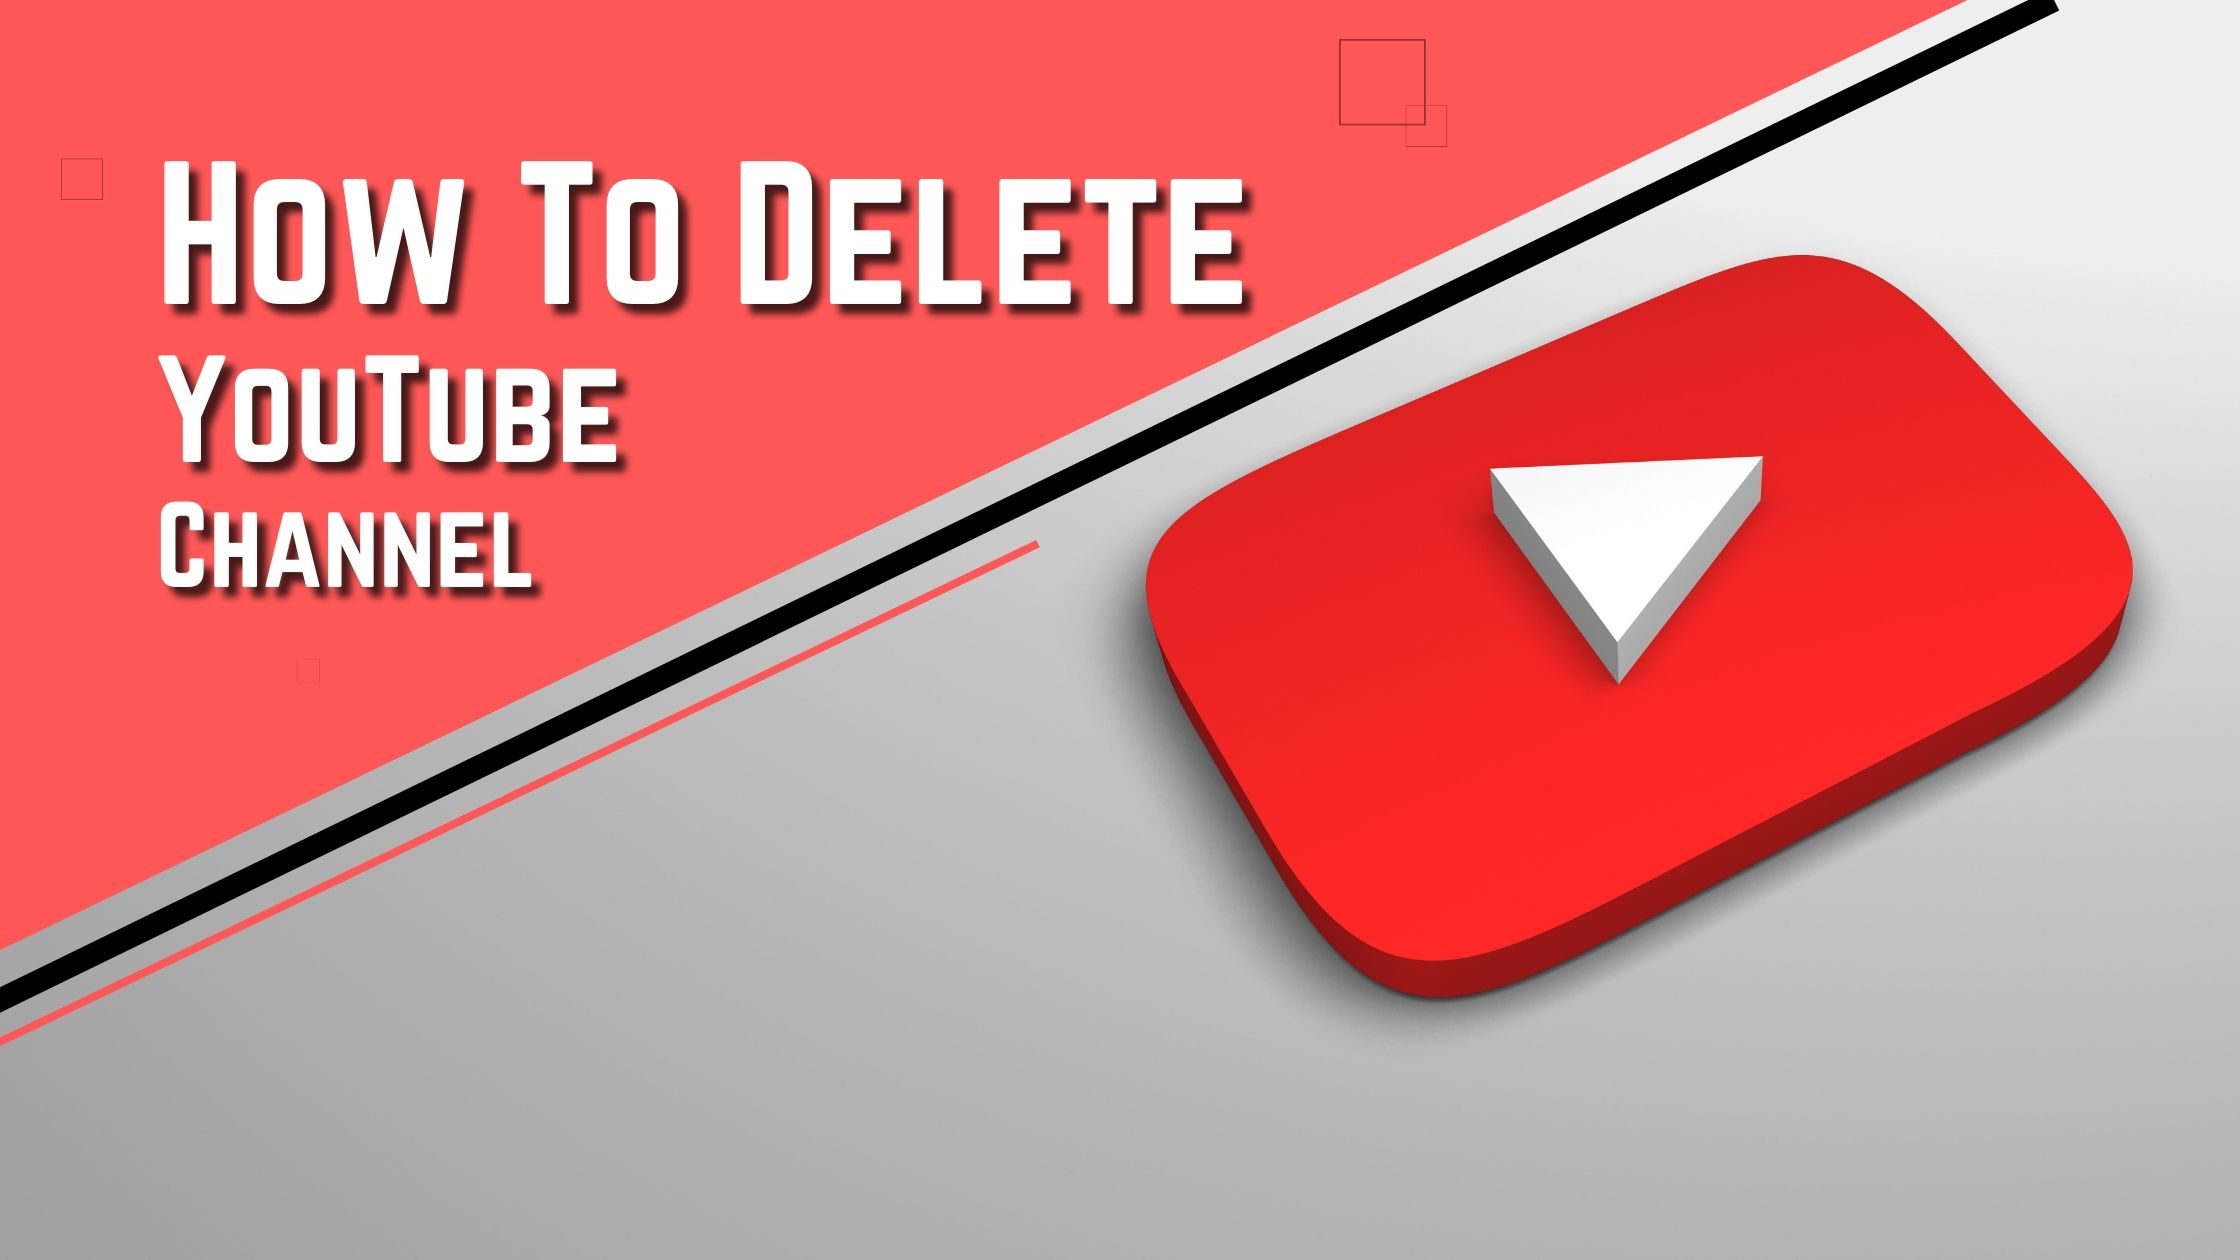 How To Delete YouTube Channel